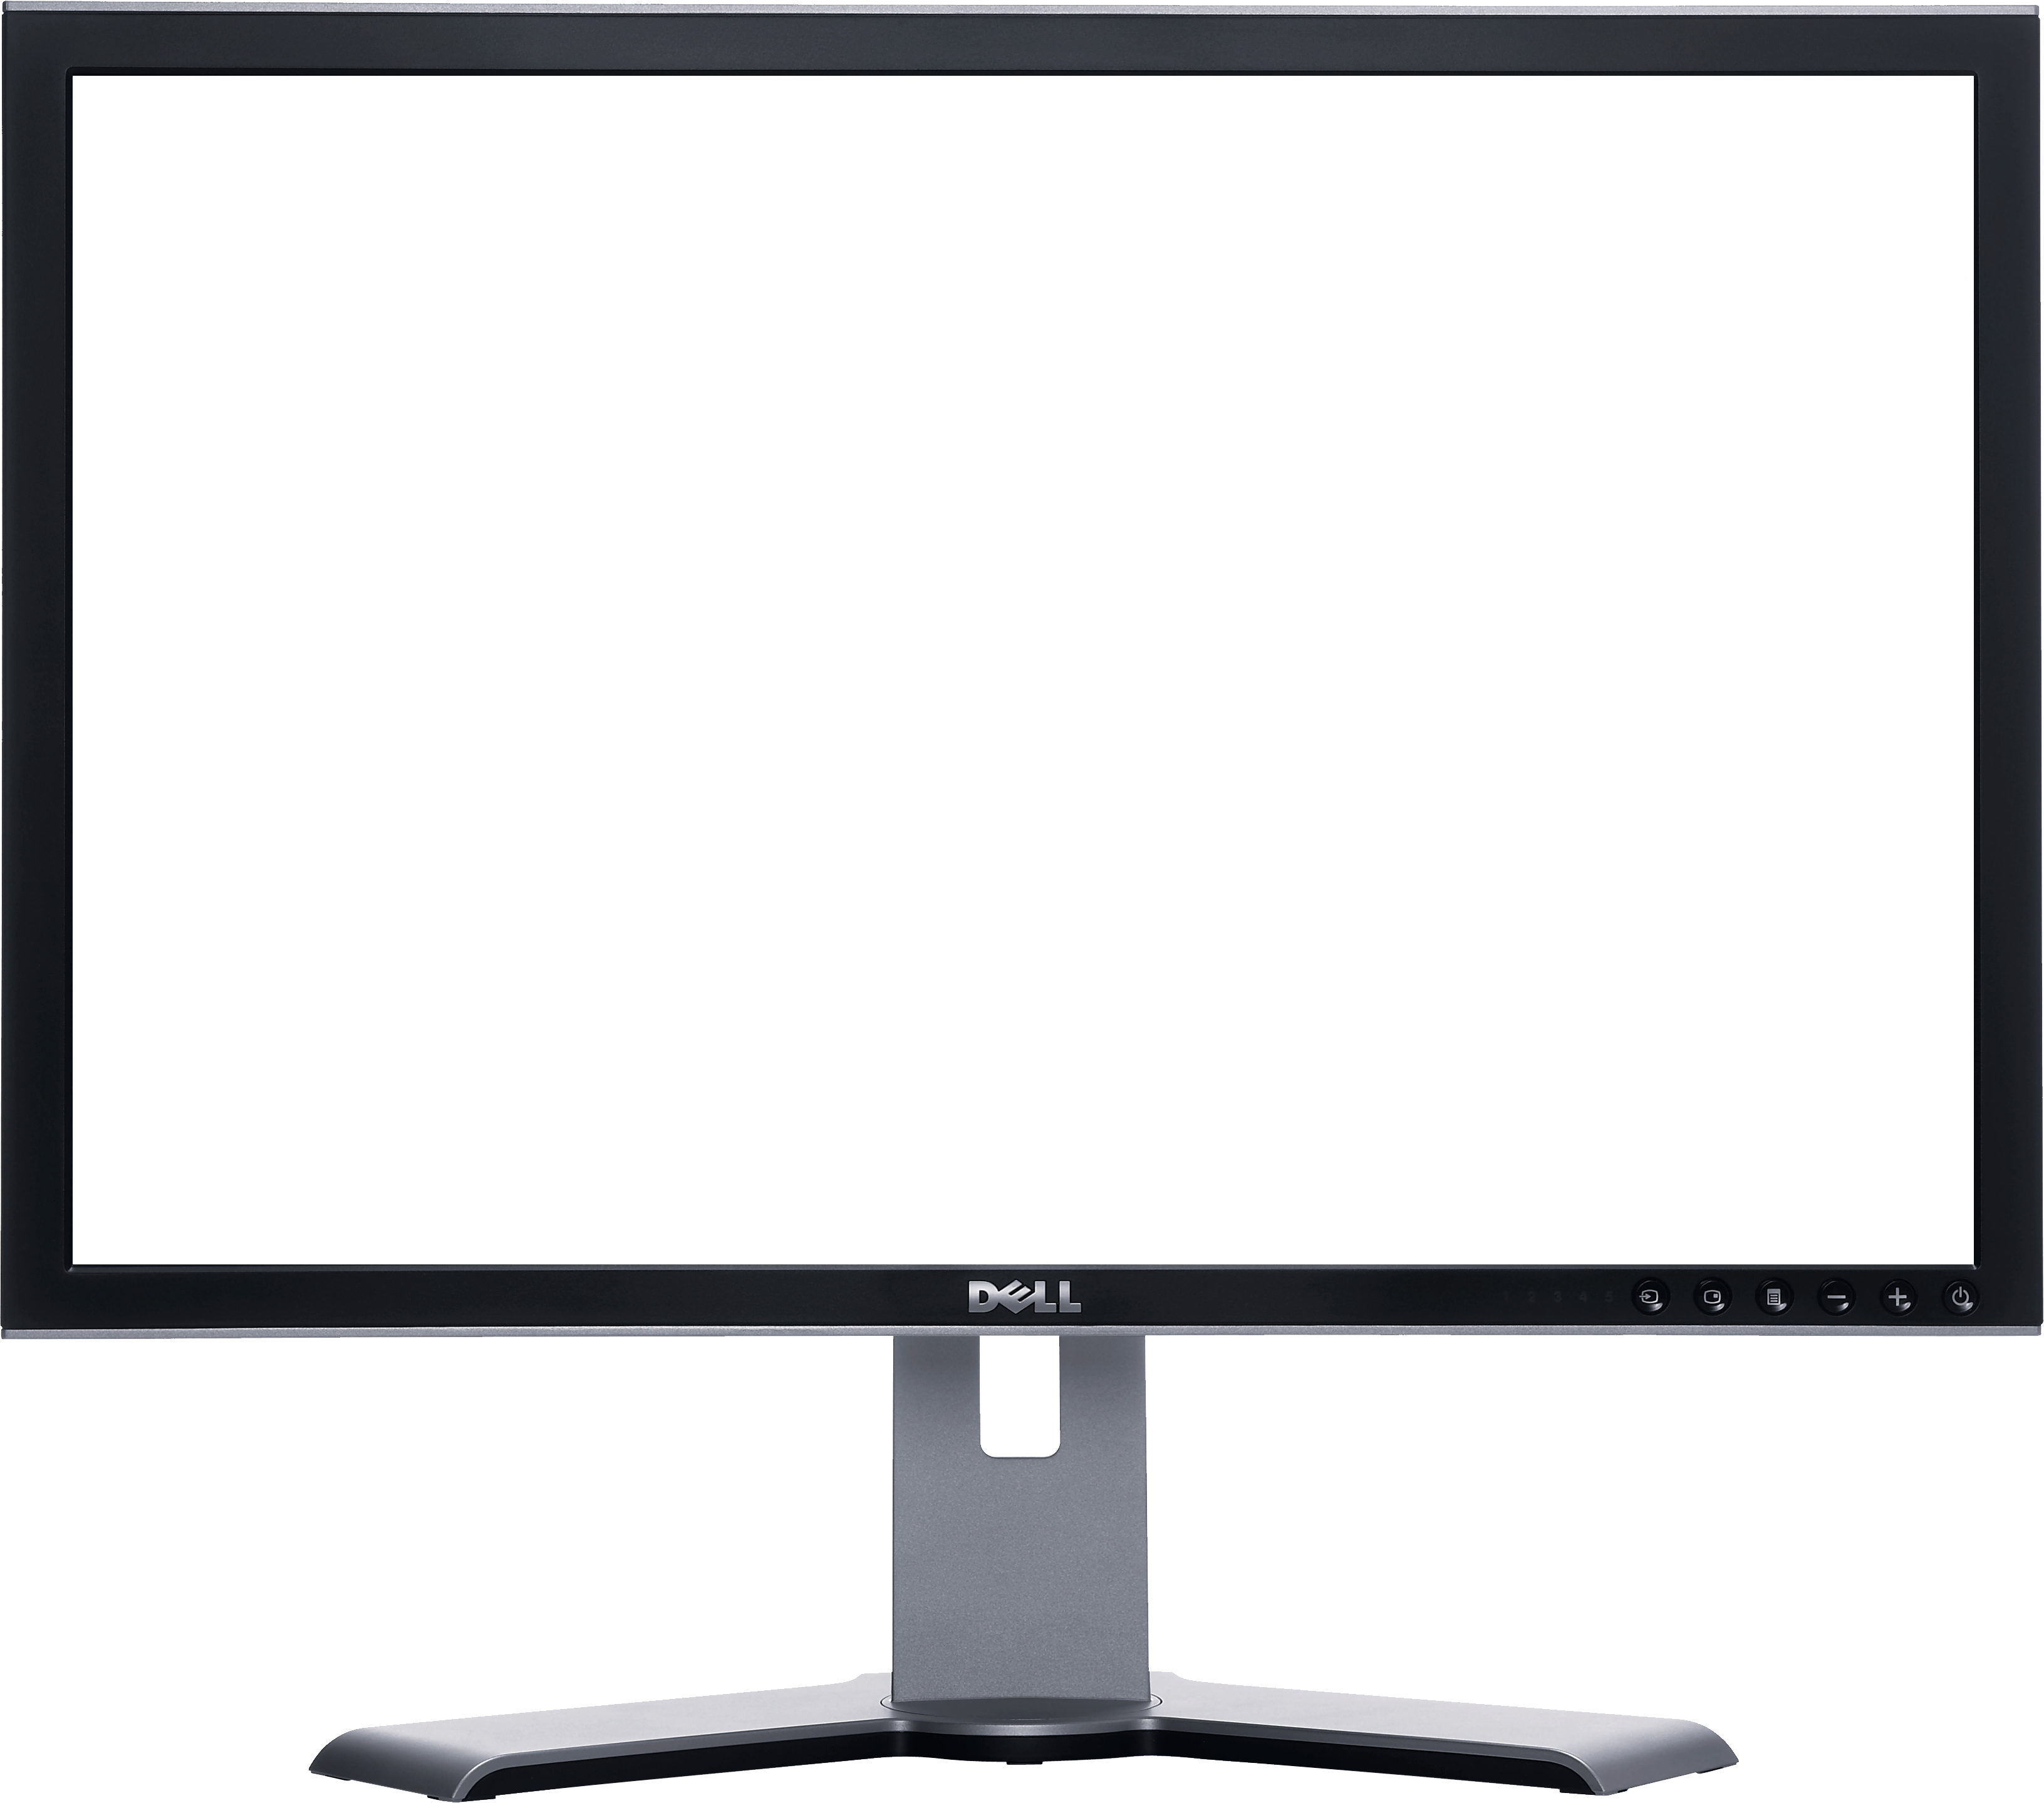 Monitor PNG Transparent Monitor.PNG Images. | PlusPNG